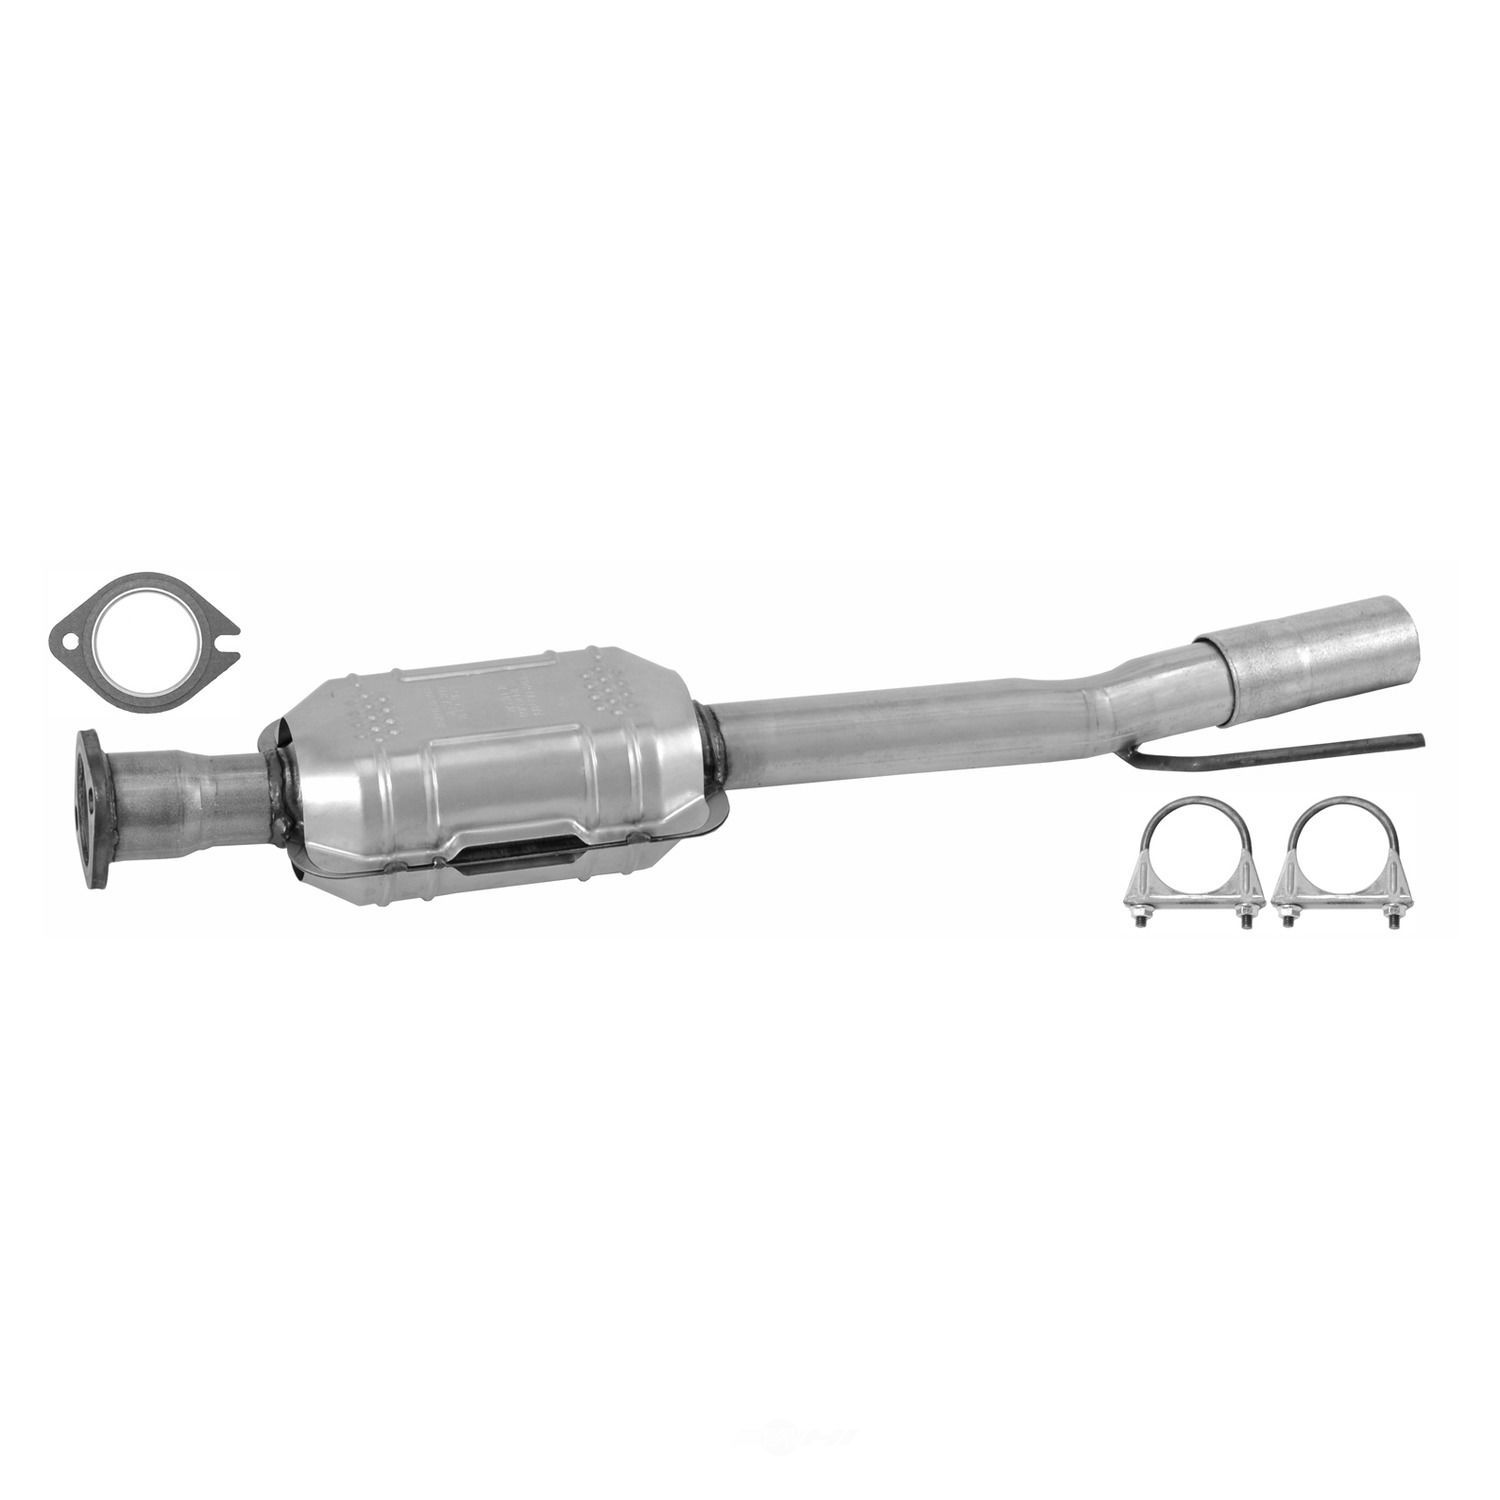 AP EXHAUST W/FEDERAL CONVERTER - Direct Fit Converter (Rear) - APF 645293